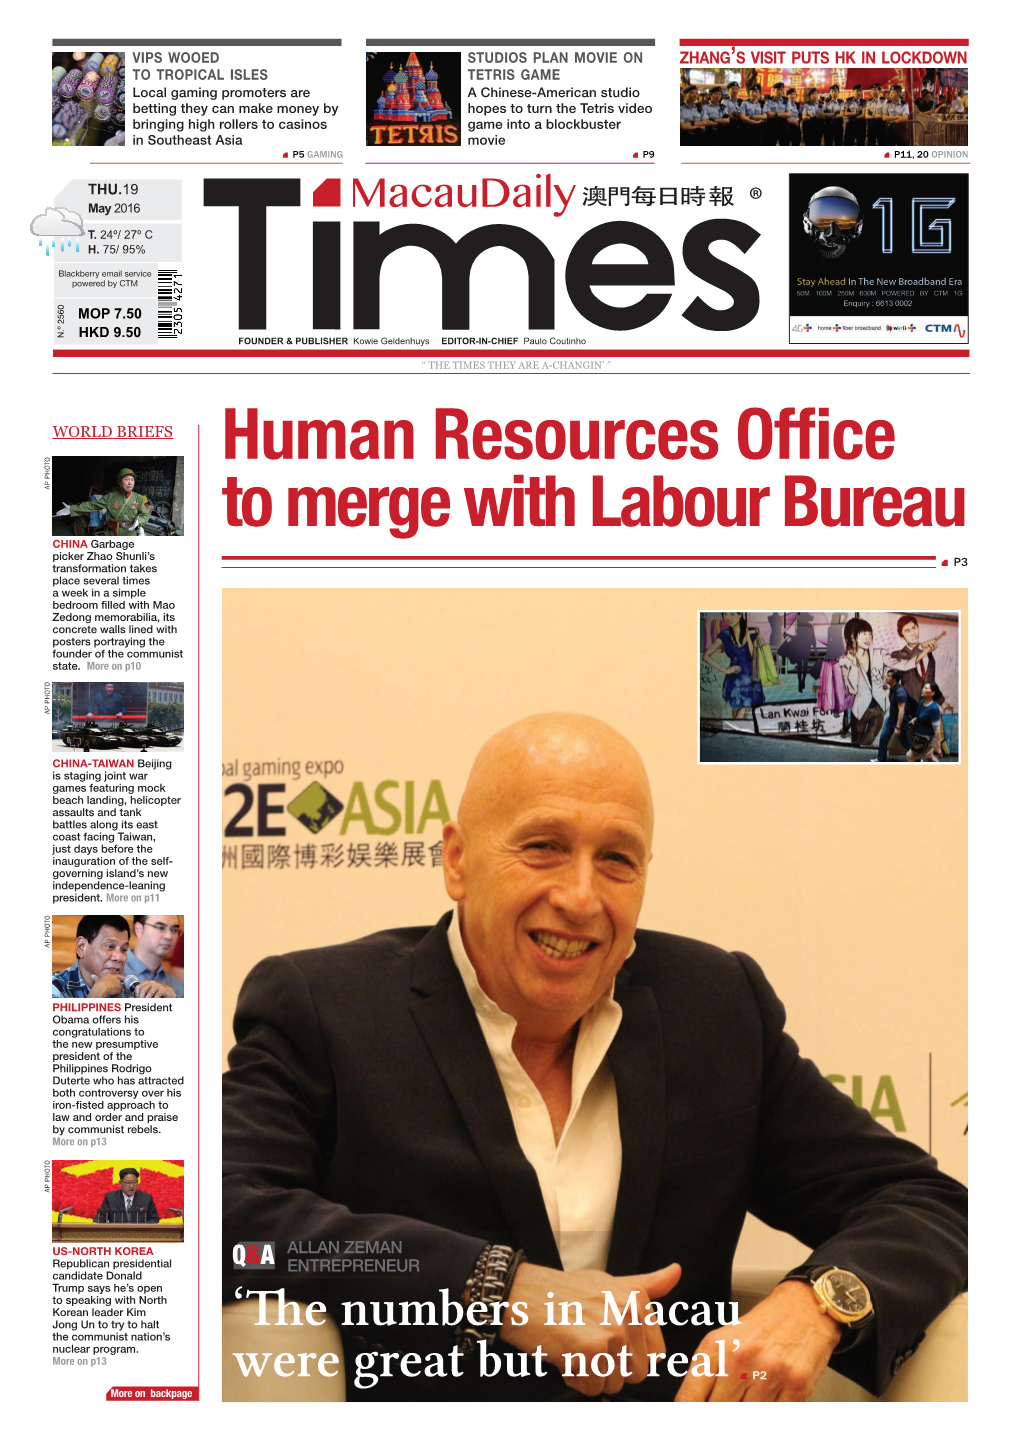 Human Resources Office to Merge with Labour Bureau